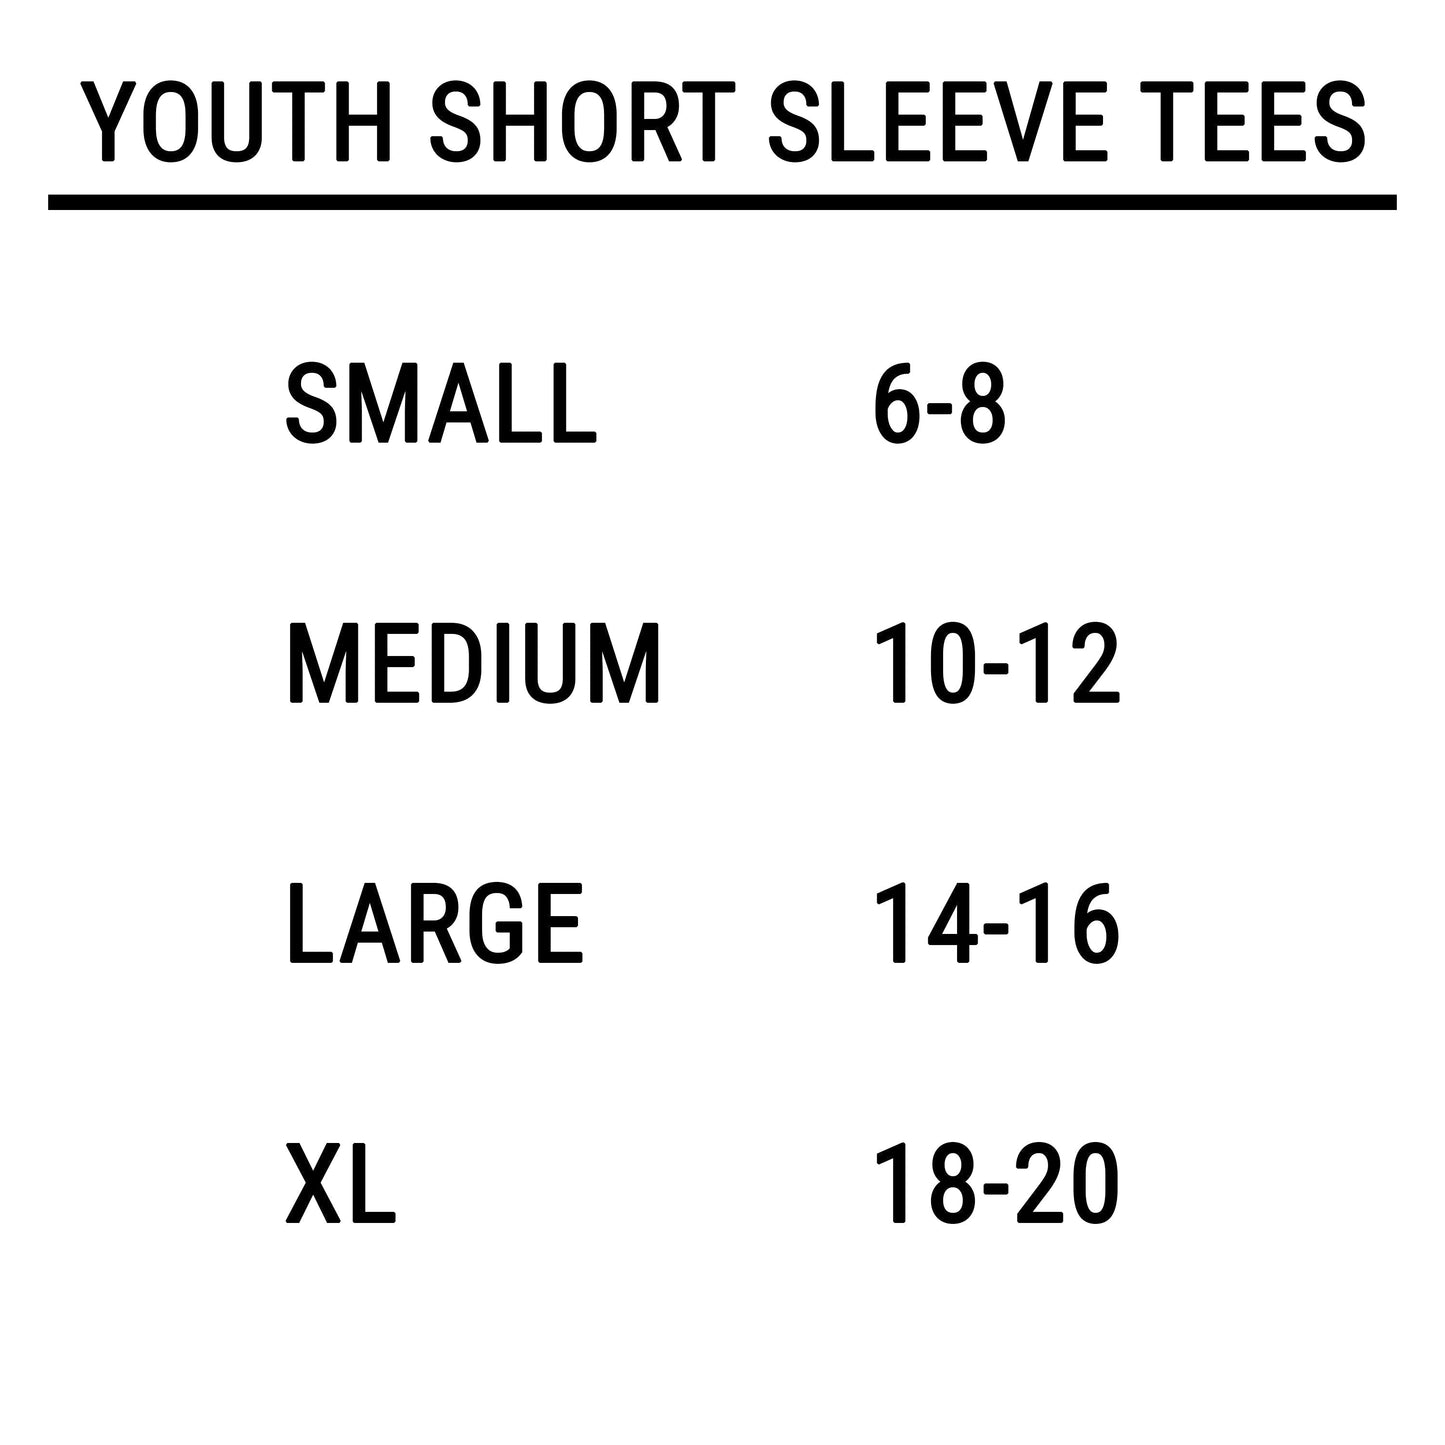 Let's Do The Yam Thing | Youth Graphic Short Sleeve Tee